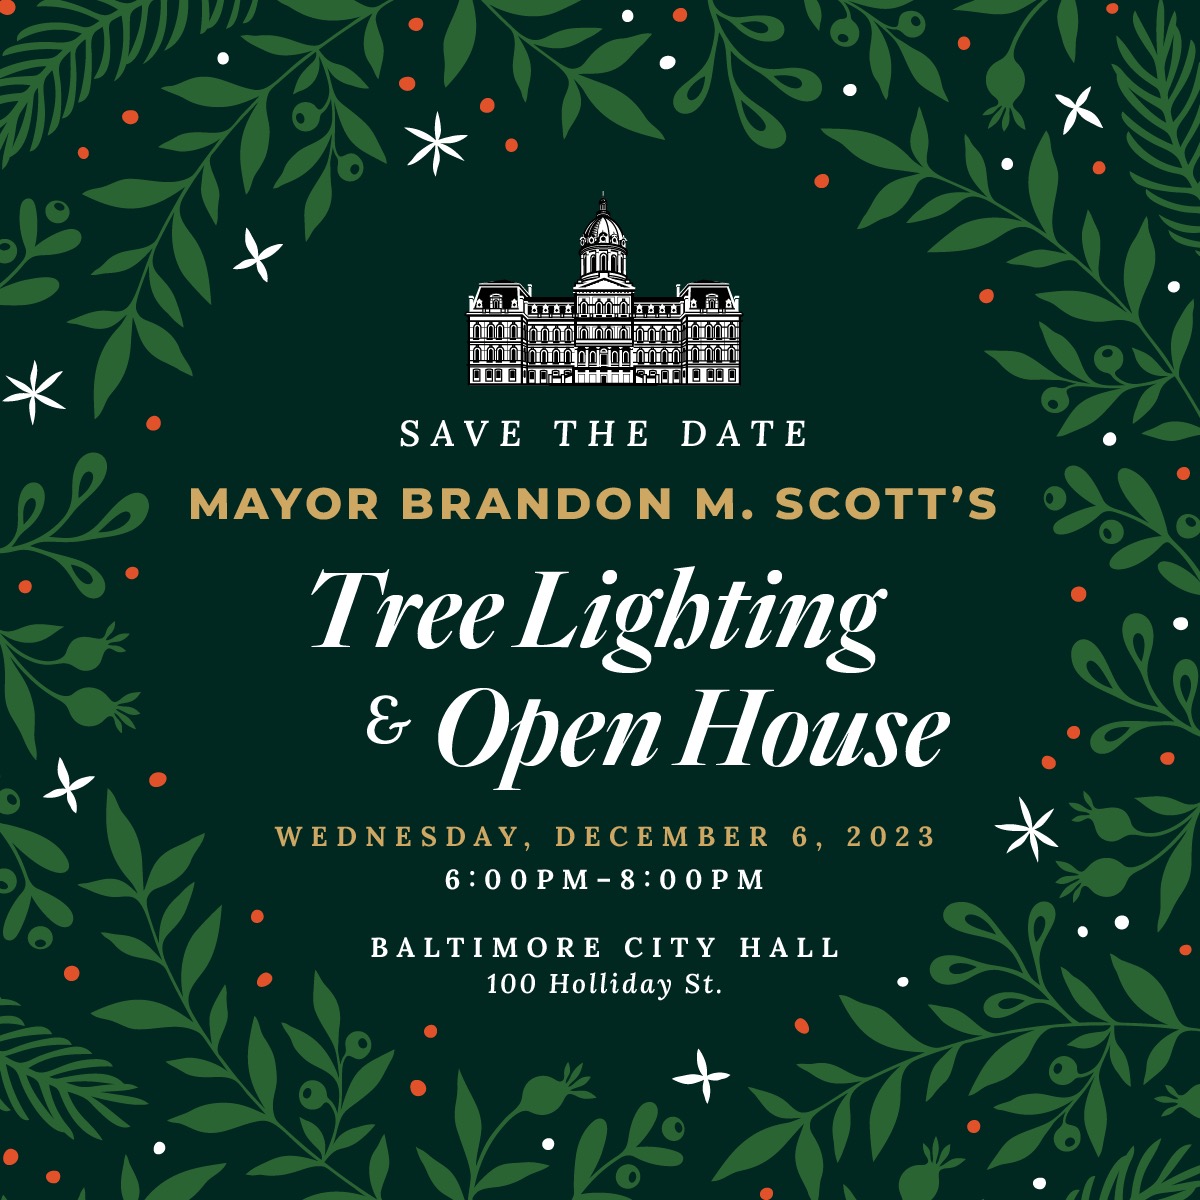 Wednesday Dec 6, 2023 Mayor's Tree Lighting and Open House 6-8pm at City Hall